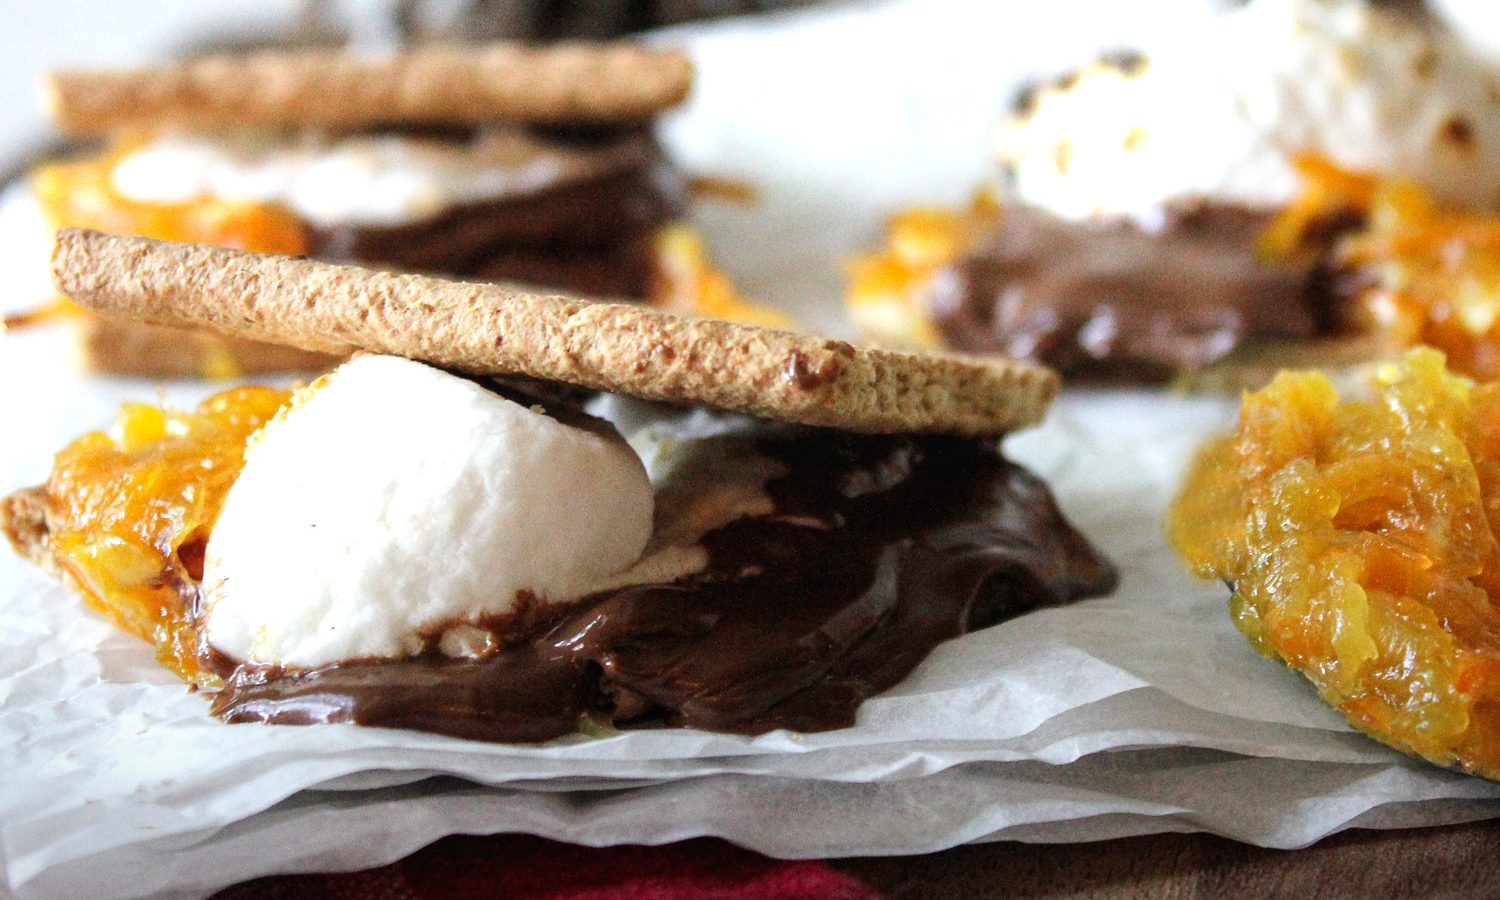 Orange Marmalade S'more Recipe with chocolate bars, graham crackers and marshmellows